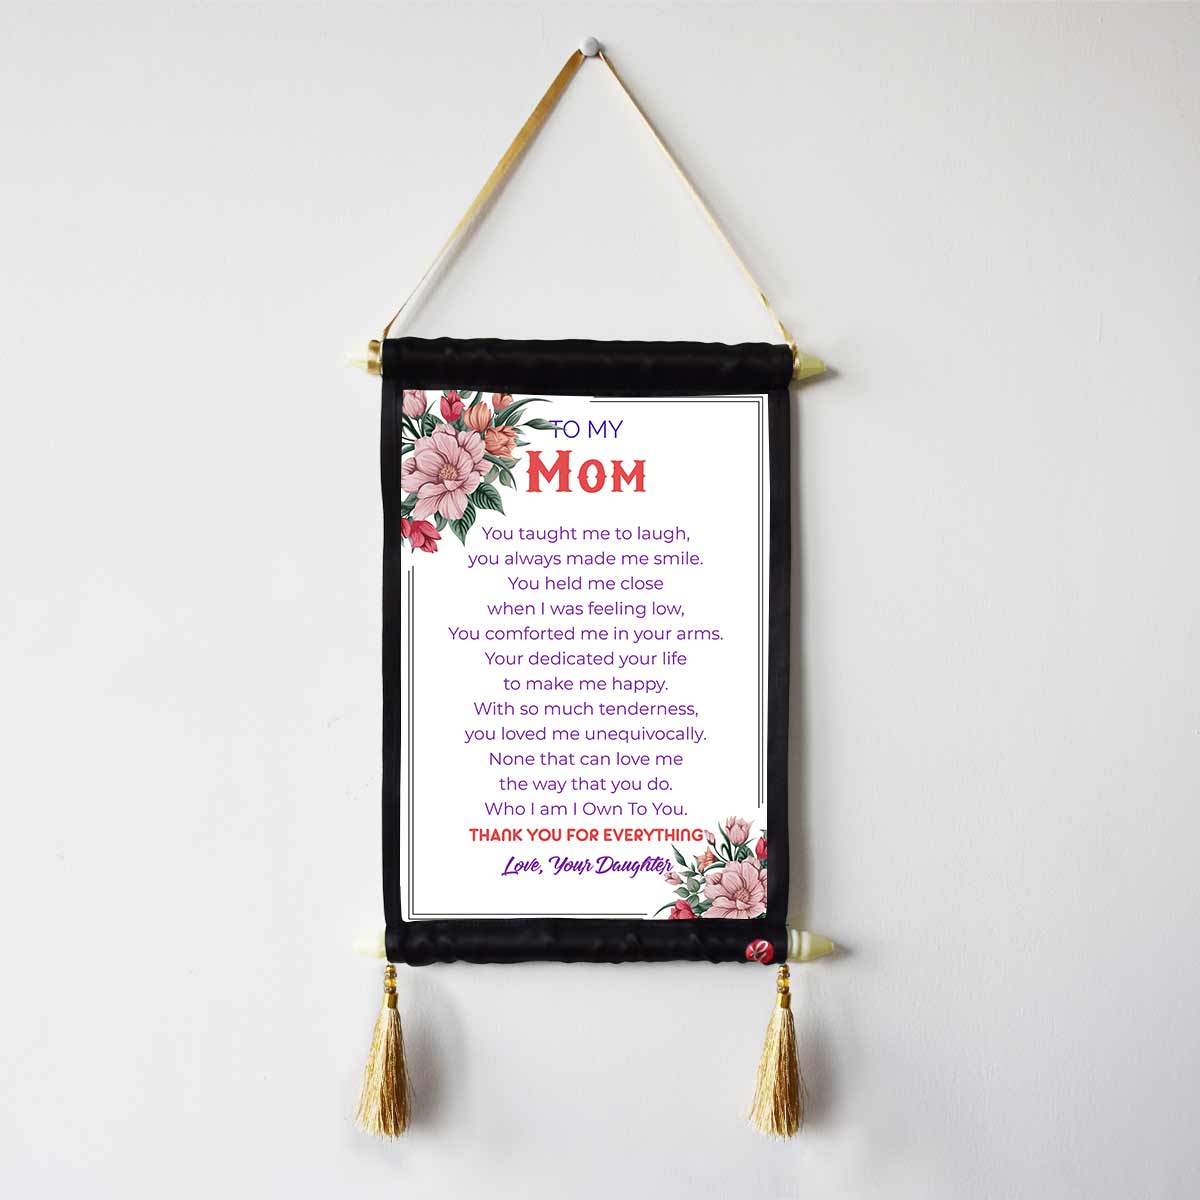 To my Mom Letter Scroll-4